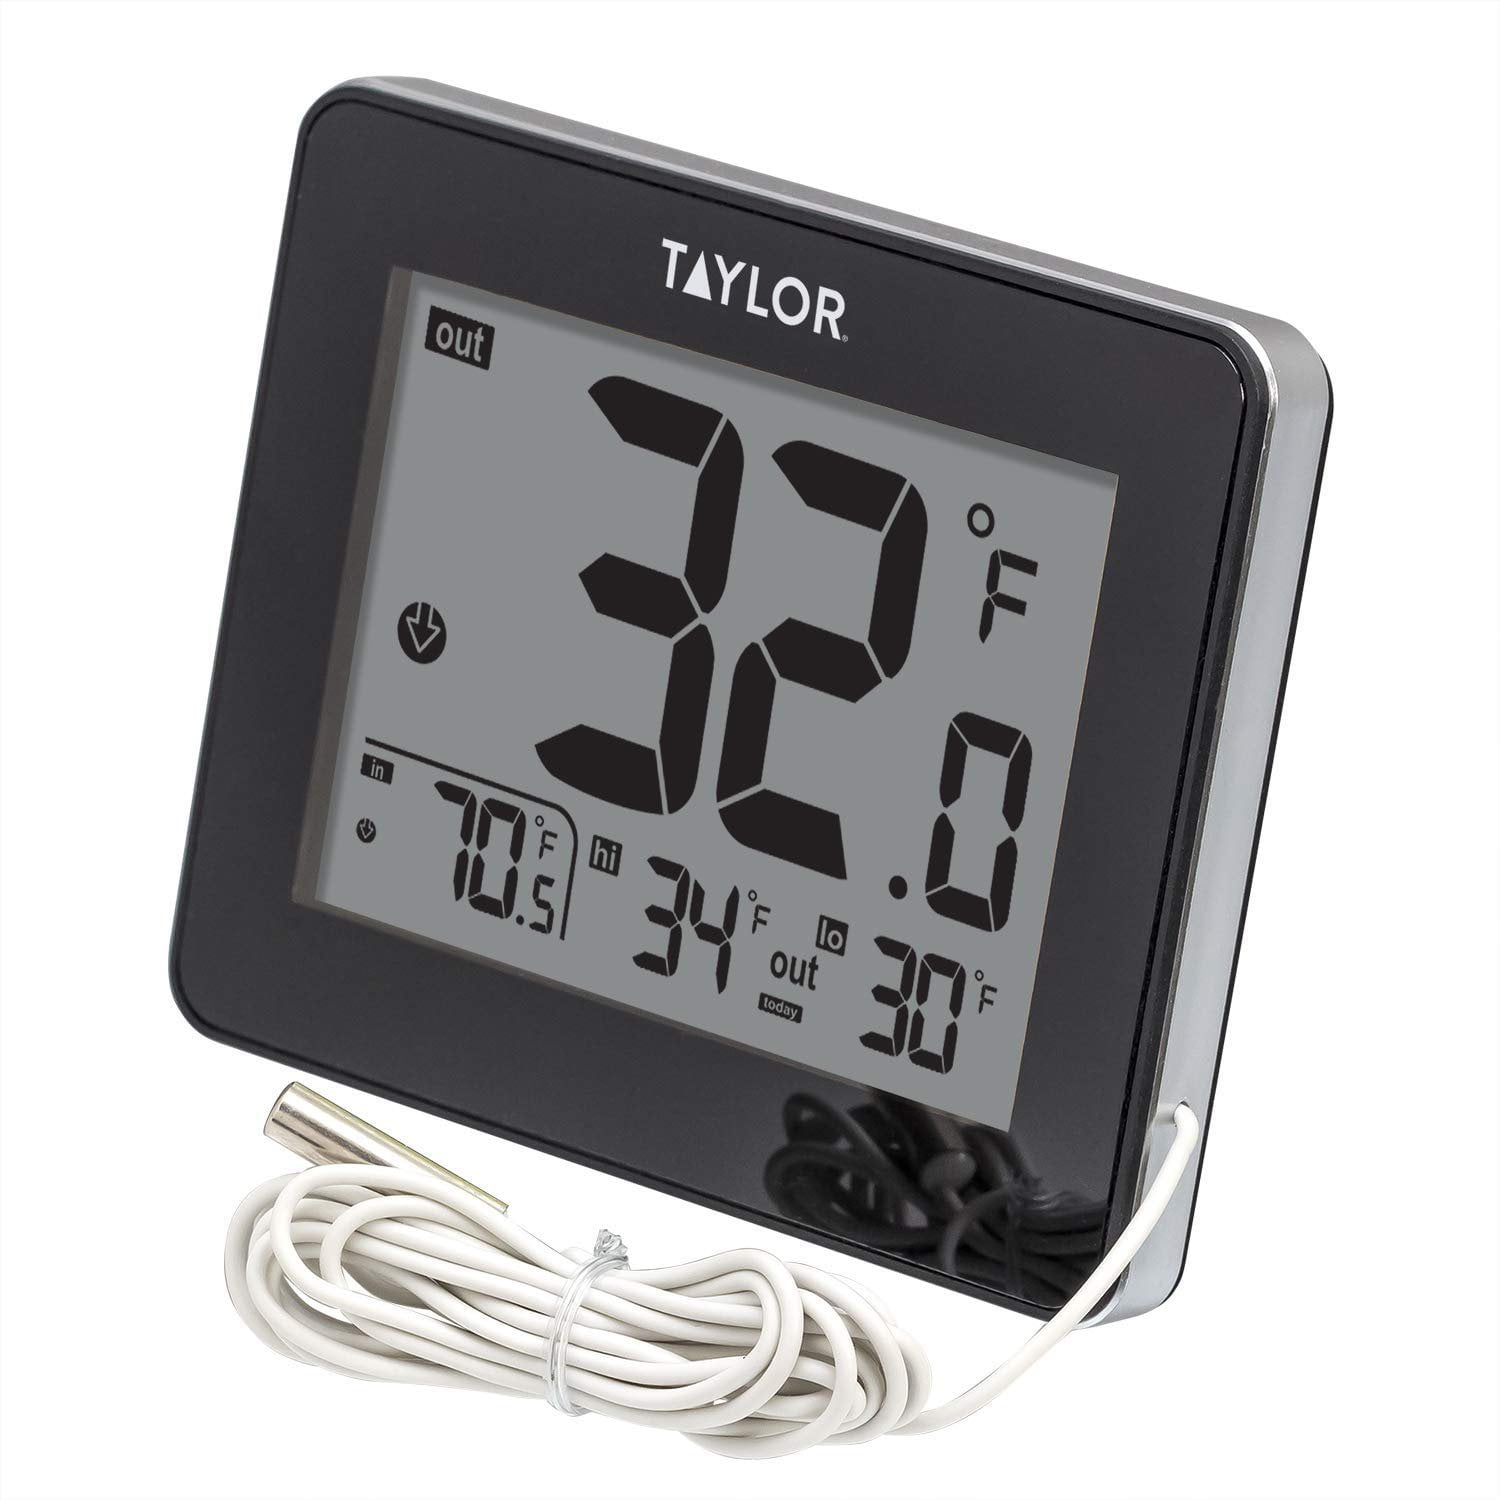 Taylor 6714 Indoor Outdoor Thermometer 12 Inch: Dial Faced Thermometers  (077784067147-2)